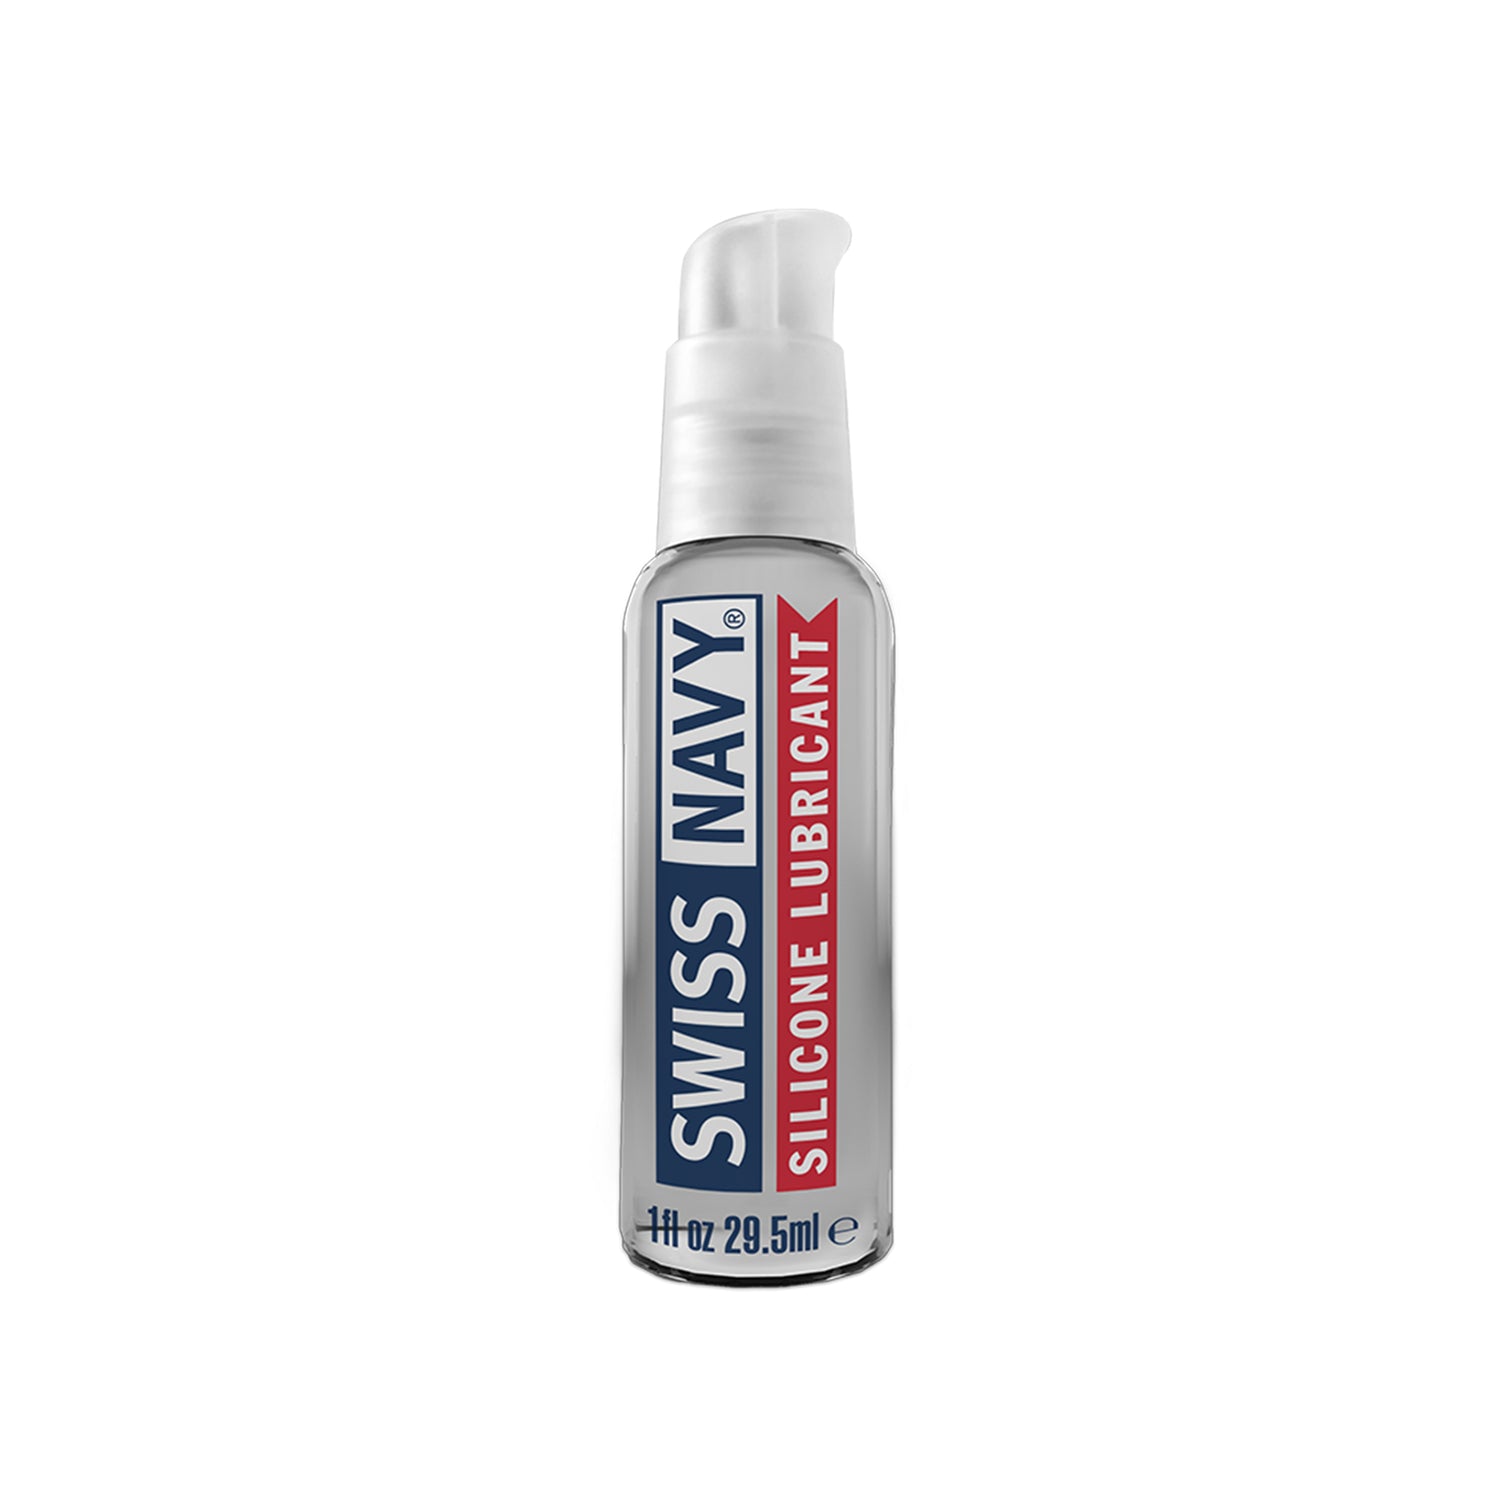 Swiss Navy Silicone Based Lubricant 1oz/29ml - Just for you desires